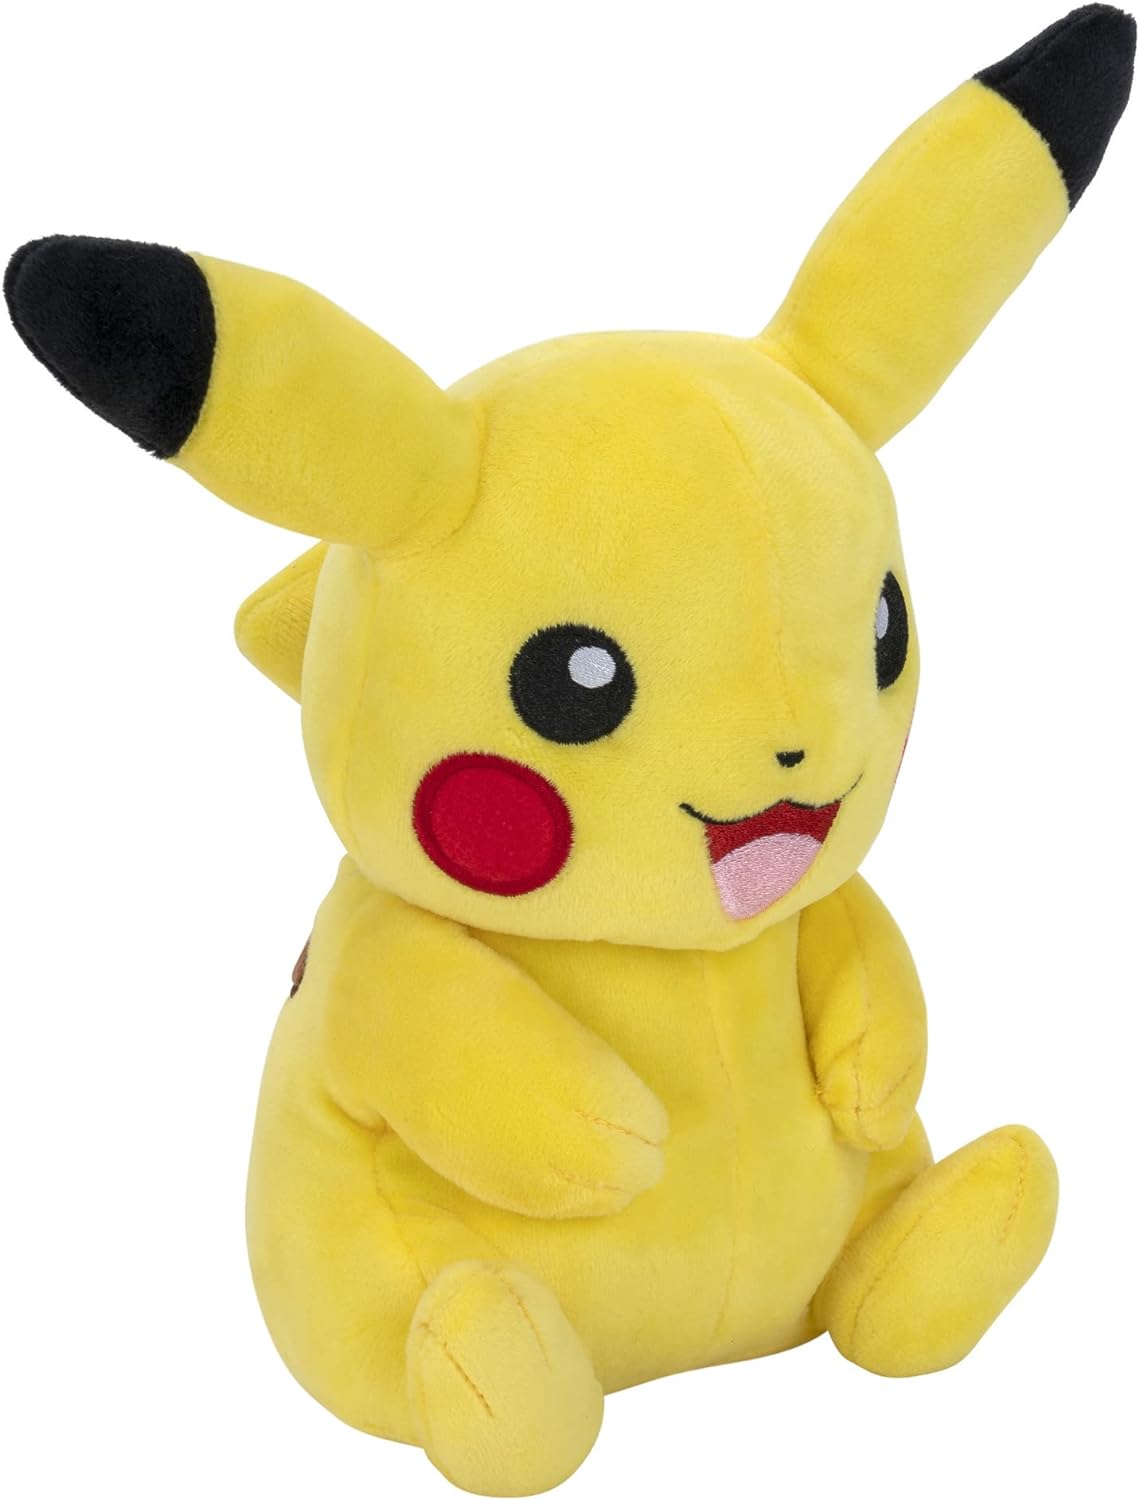 Pokémon Official & Premium Quality 8-Inch Pikachu - Adorable, Ultra-Soft, Plush Toy, Perfect for Playing & Displaying - Gotta Catch "˜Em All , Yellow